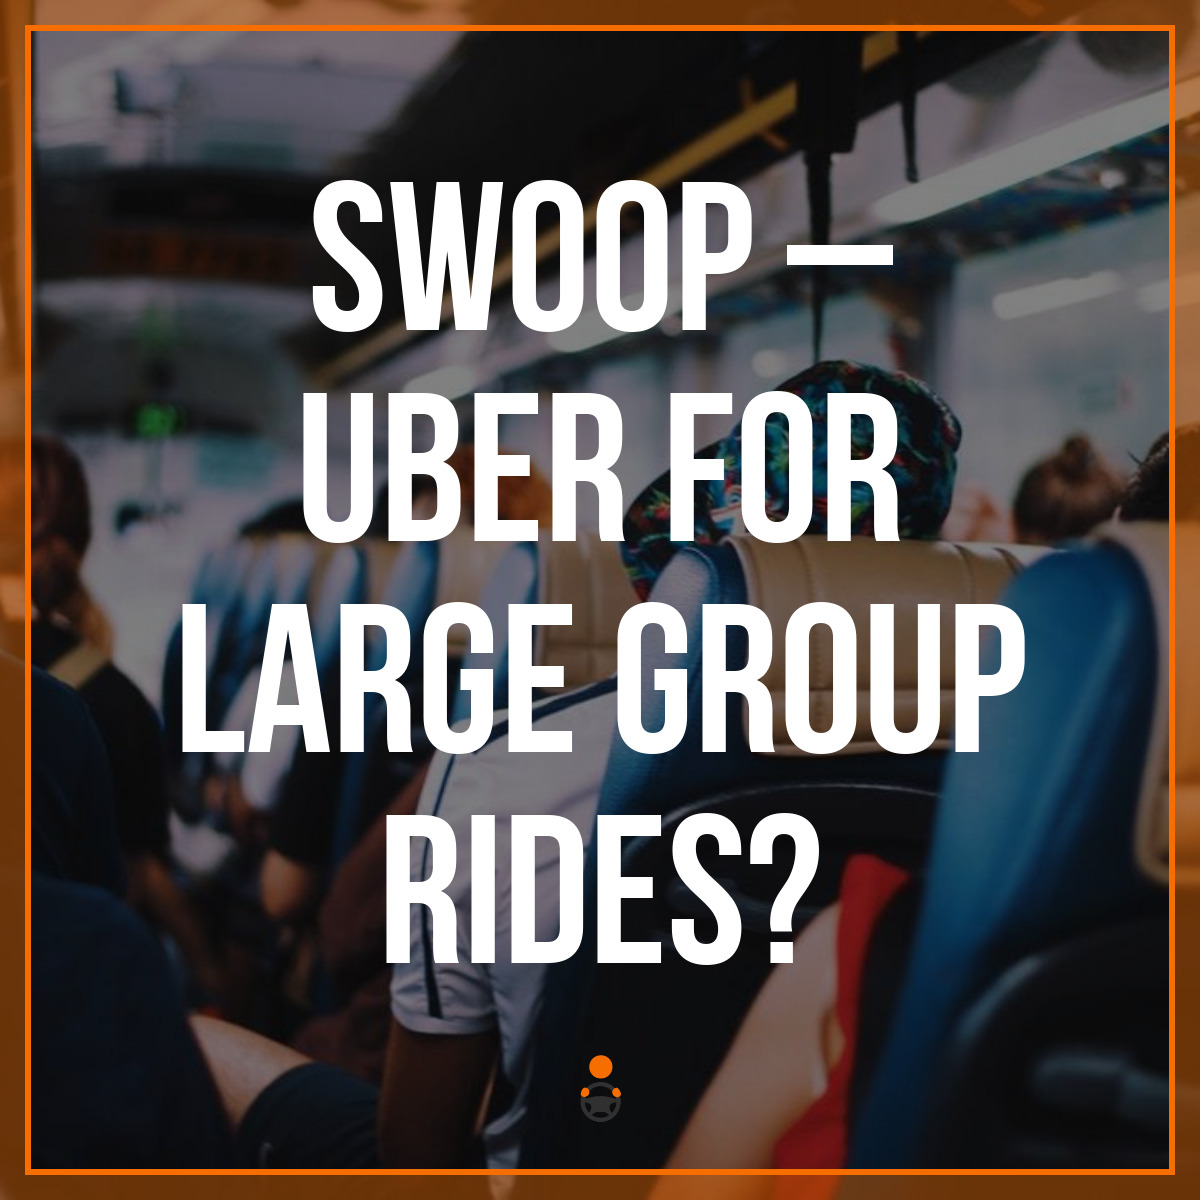 Swoop – Uber for Large Group Rides?